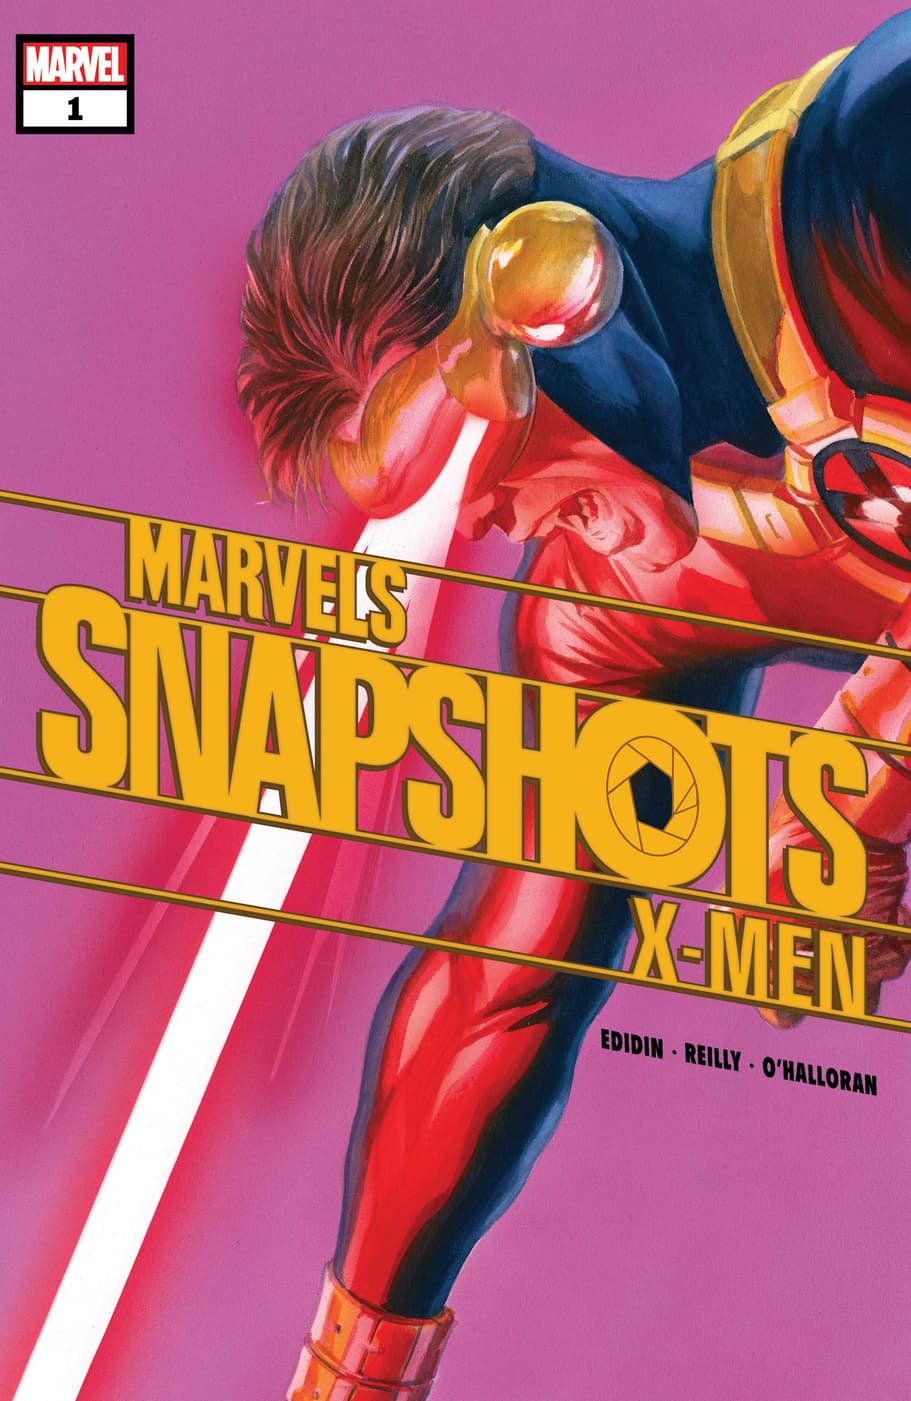 X-MEN: MARVELS SNAPSHOTS #1 cover by Alex Ross